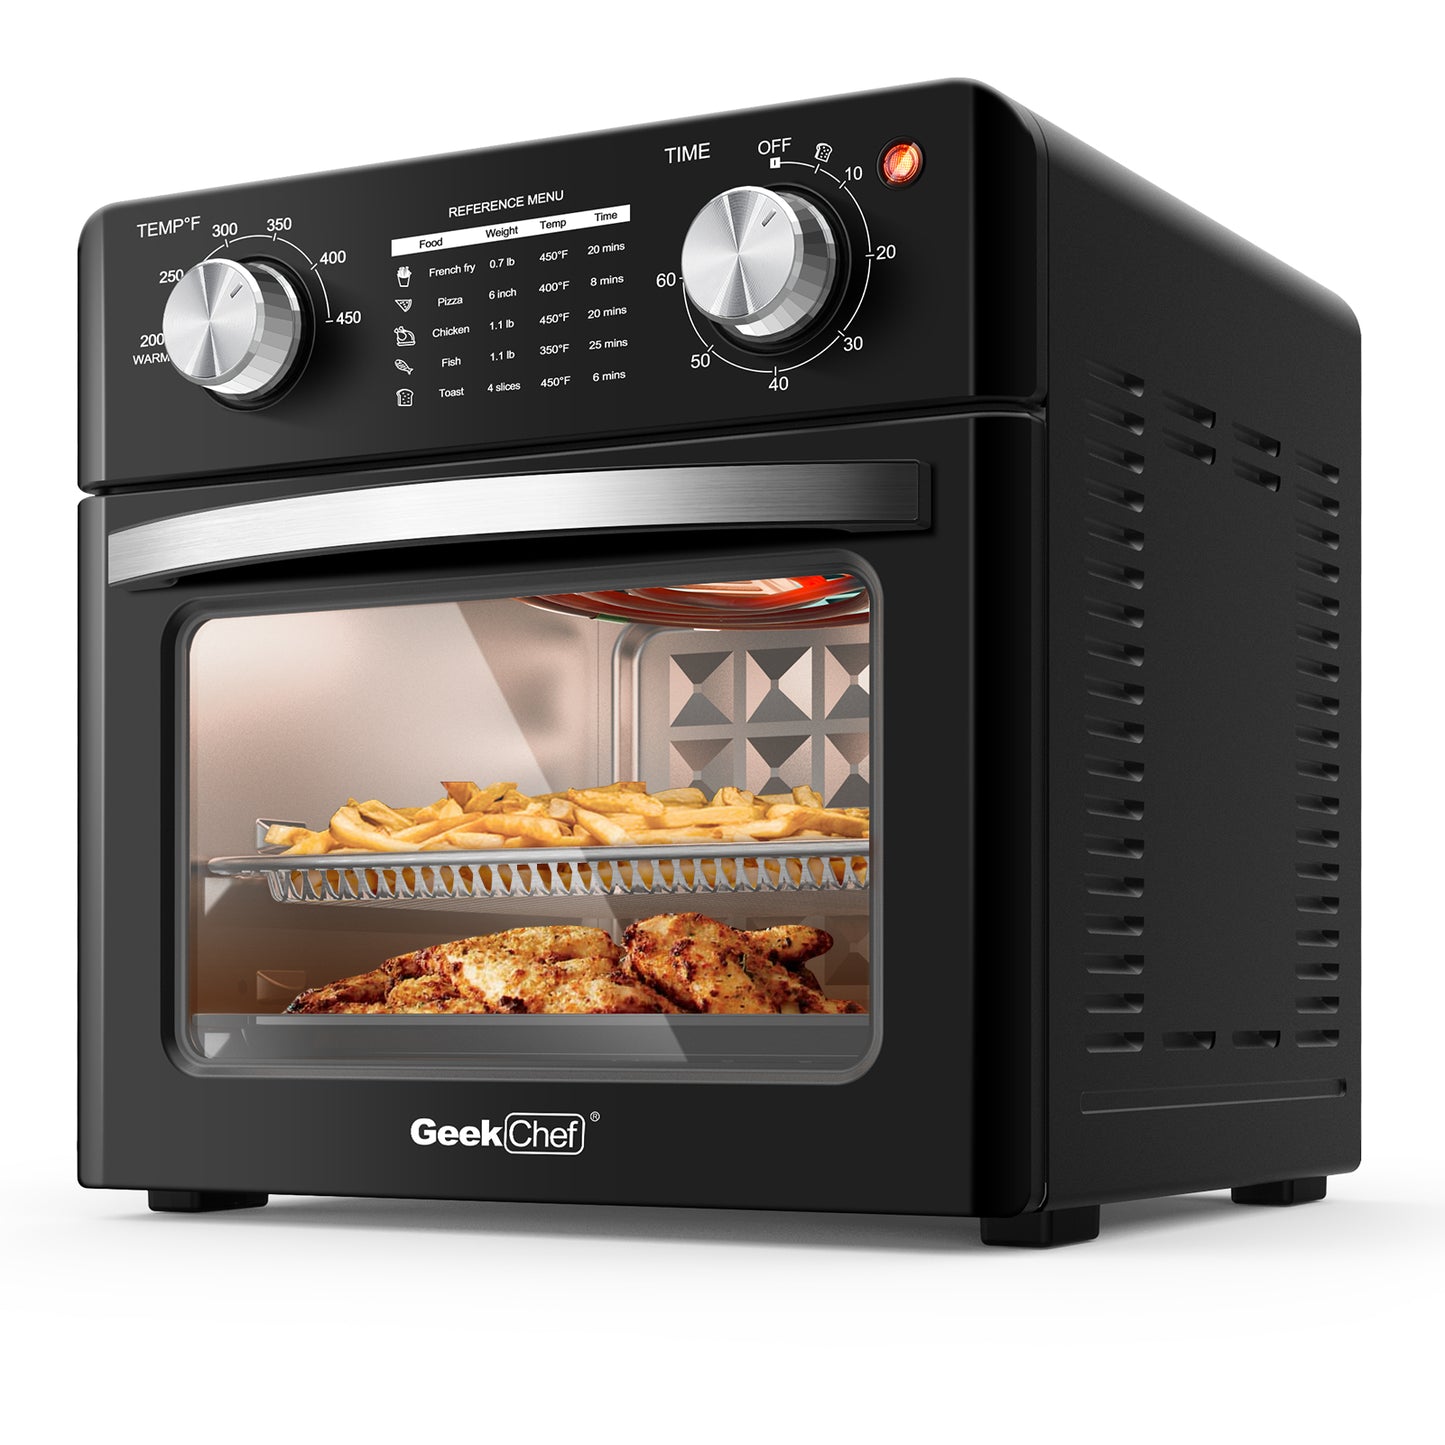 Geek Chef Air Fryer 10QT, Countertop Toaster Oven, 4 Slice Toaster Air Fryer Oven Warm,